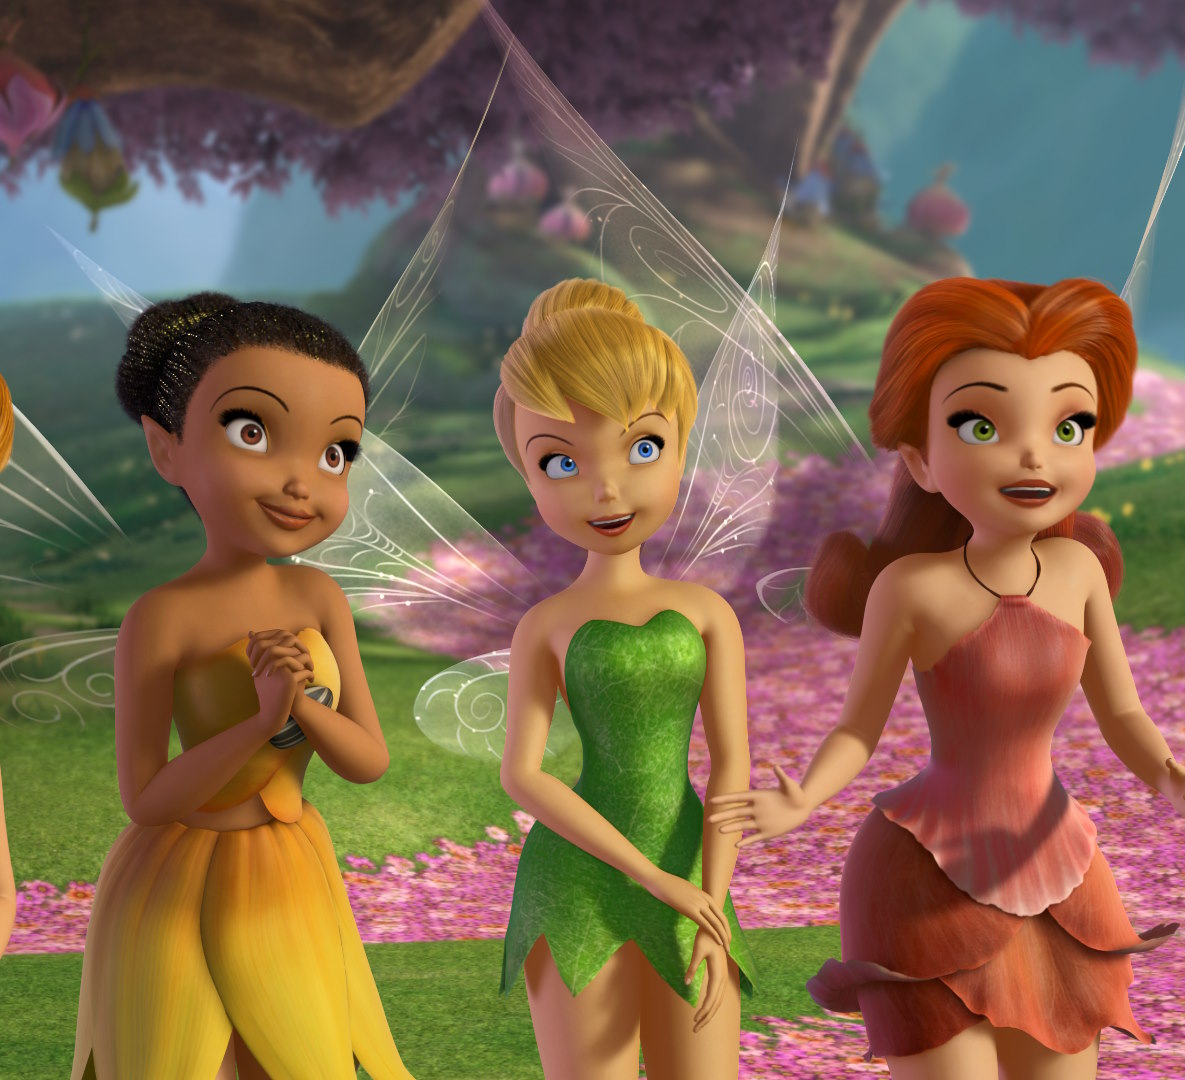 Tinker Bell and her fairy friends